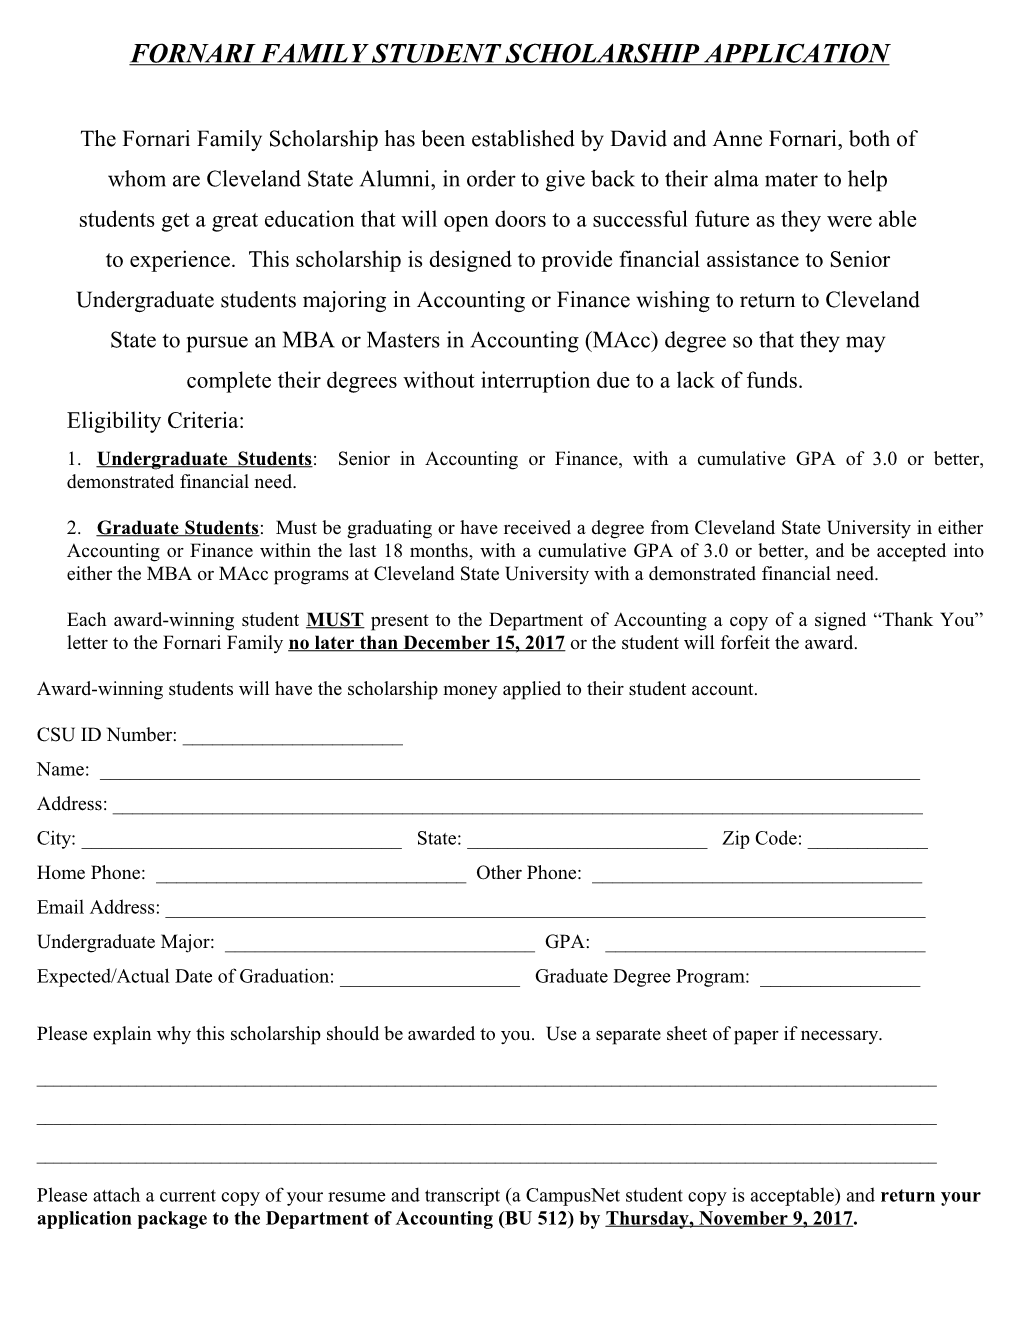 2011 Firm/Accounting Student Scholarship Application